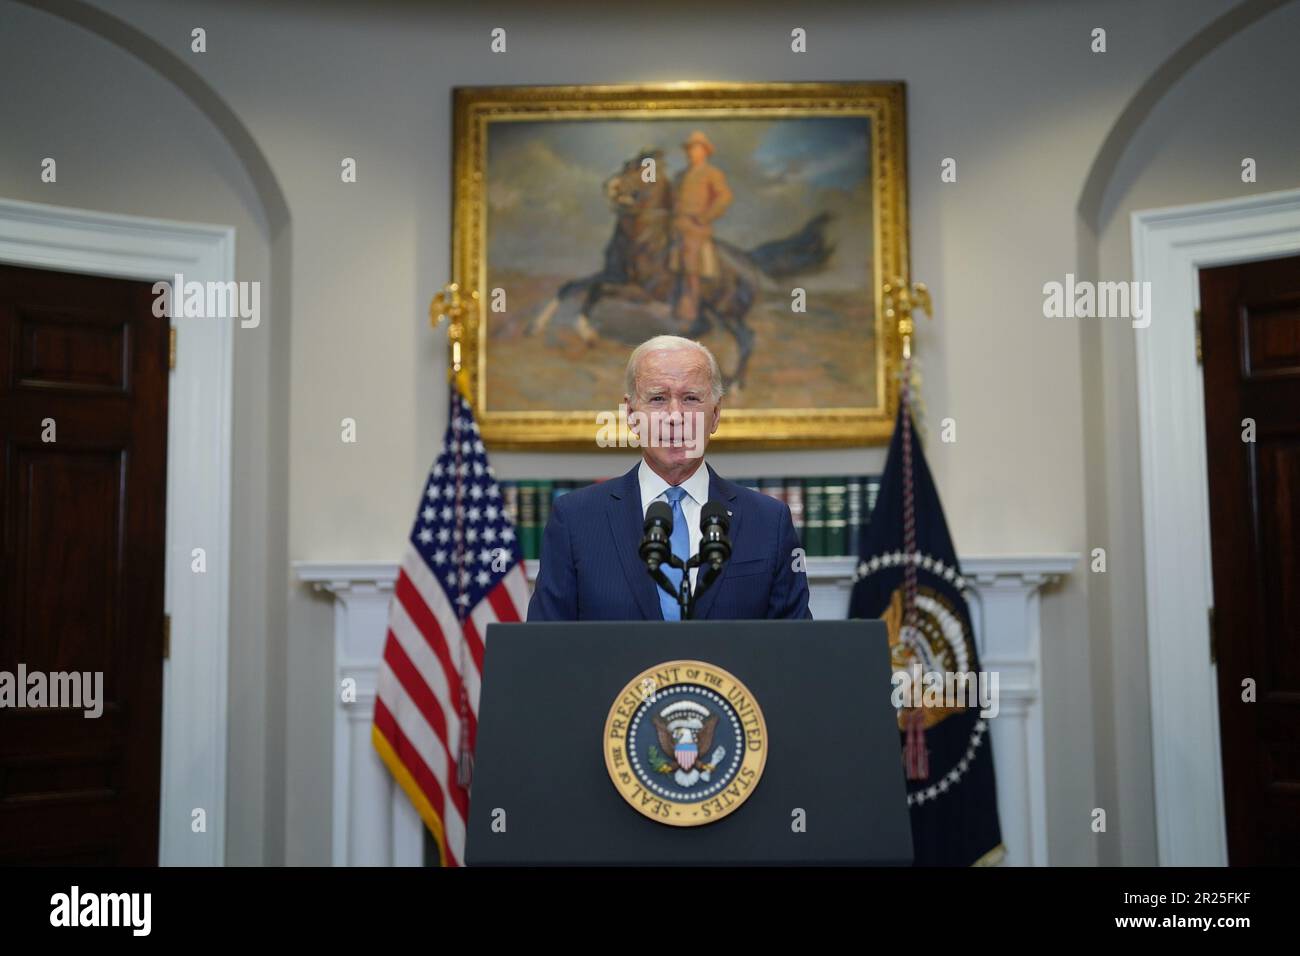 Washington, United States. 17th May, 2023. US President Joe Biden speaks in the Roosevelt Room of the White House in Washington, DC, US, on Wednesday, May 17, 2023. Biden expressed confidence that negotiators would reach an agreement to avoid a catastrophic default, seeking to reassure markets before he departs on a trip to Japan. Photo by Al Drago/UPI Credit: UPI/Alamy Live News Stock Photo